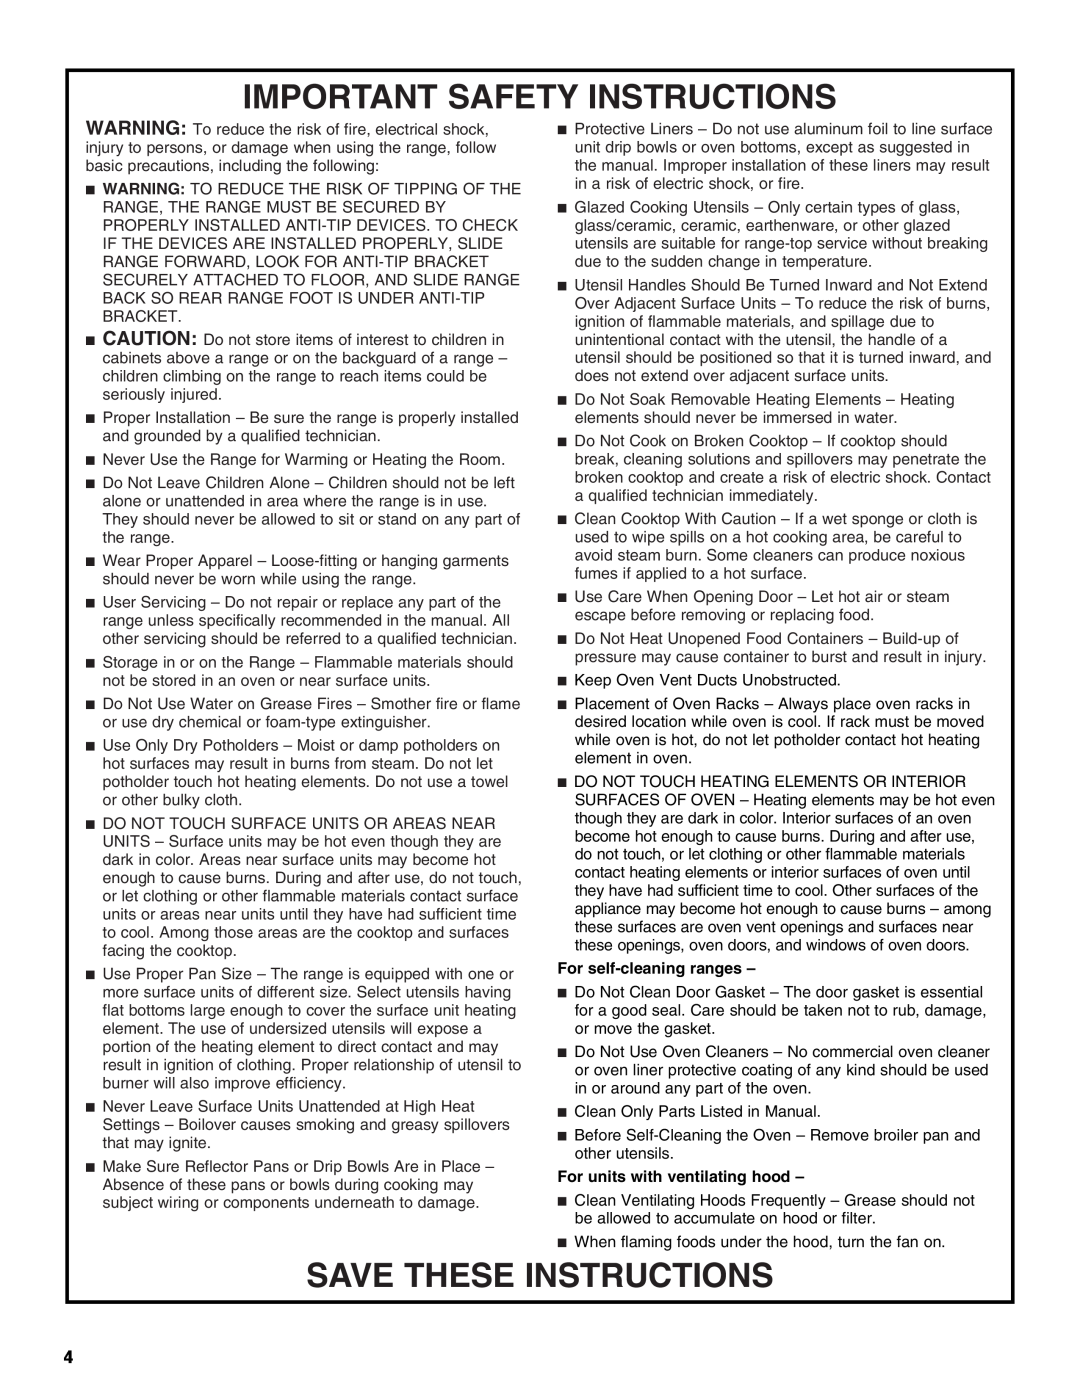 Whirlpool Ranges manual Important Safety Instructions, Save These Instructions, For self-cleaningranges 